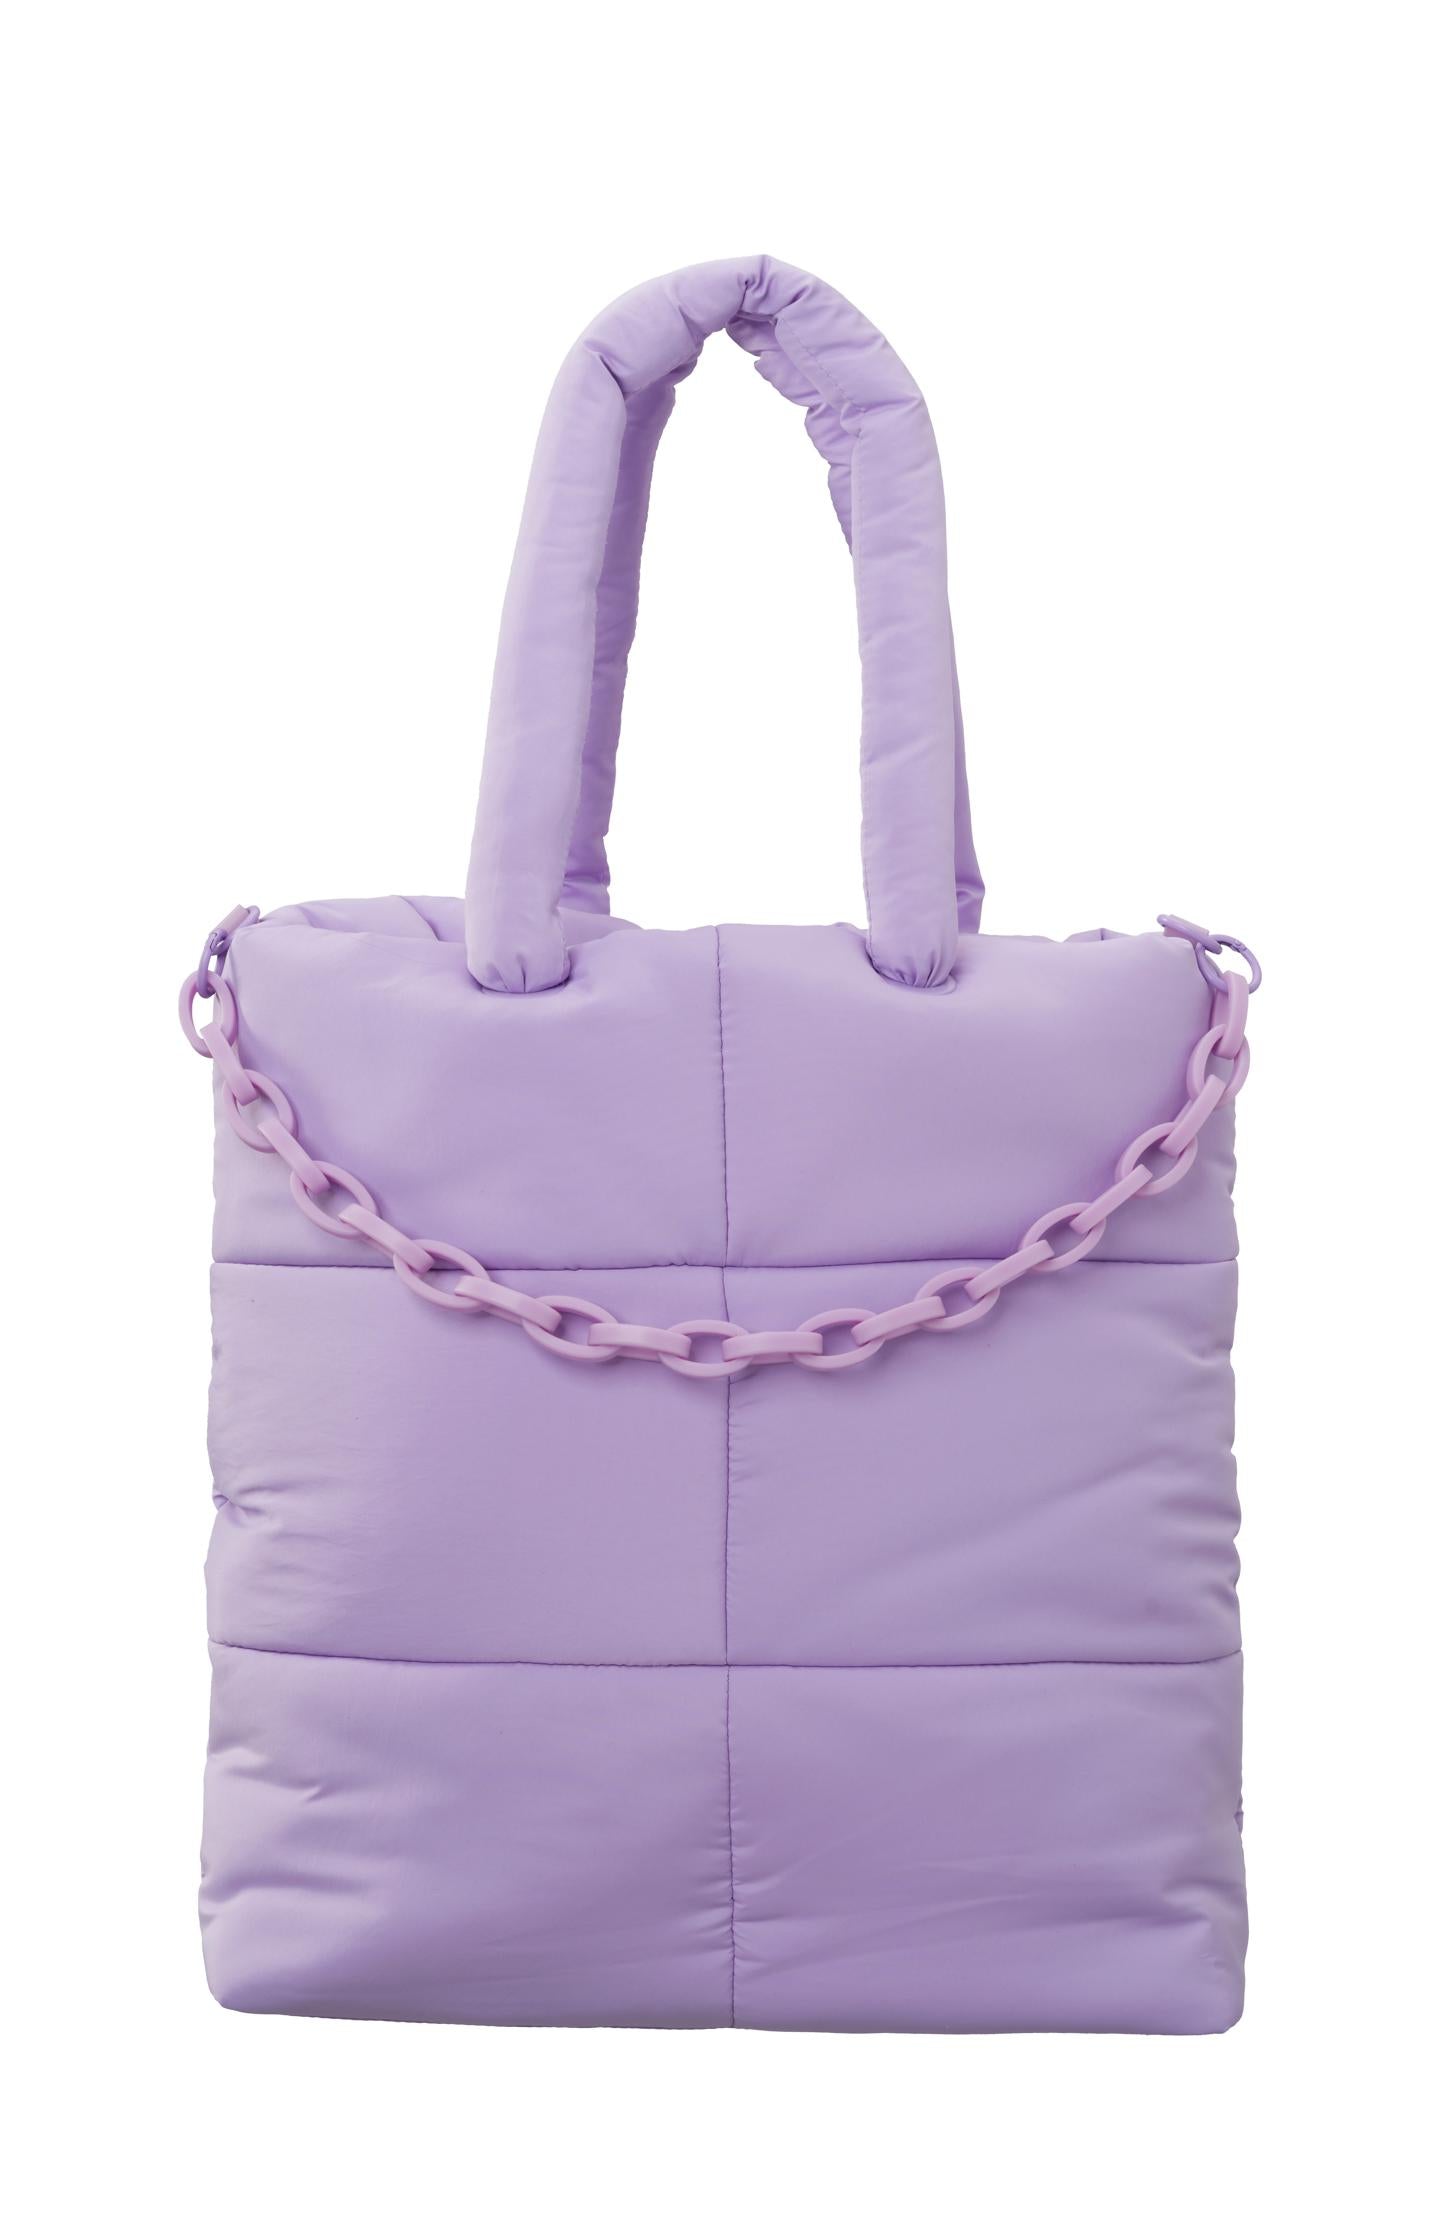 Puffer bag with chain, magnetic closure and side compartment - Orchid Petal Purple - Type: product